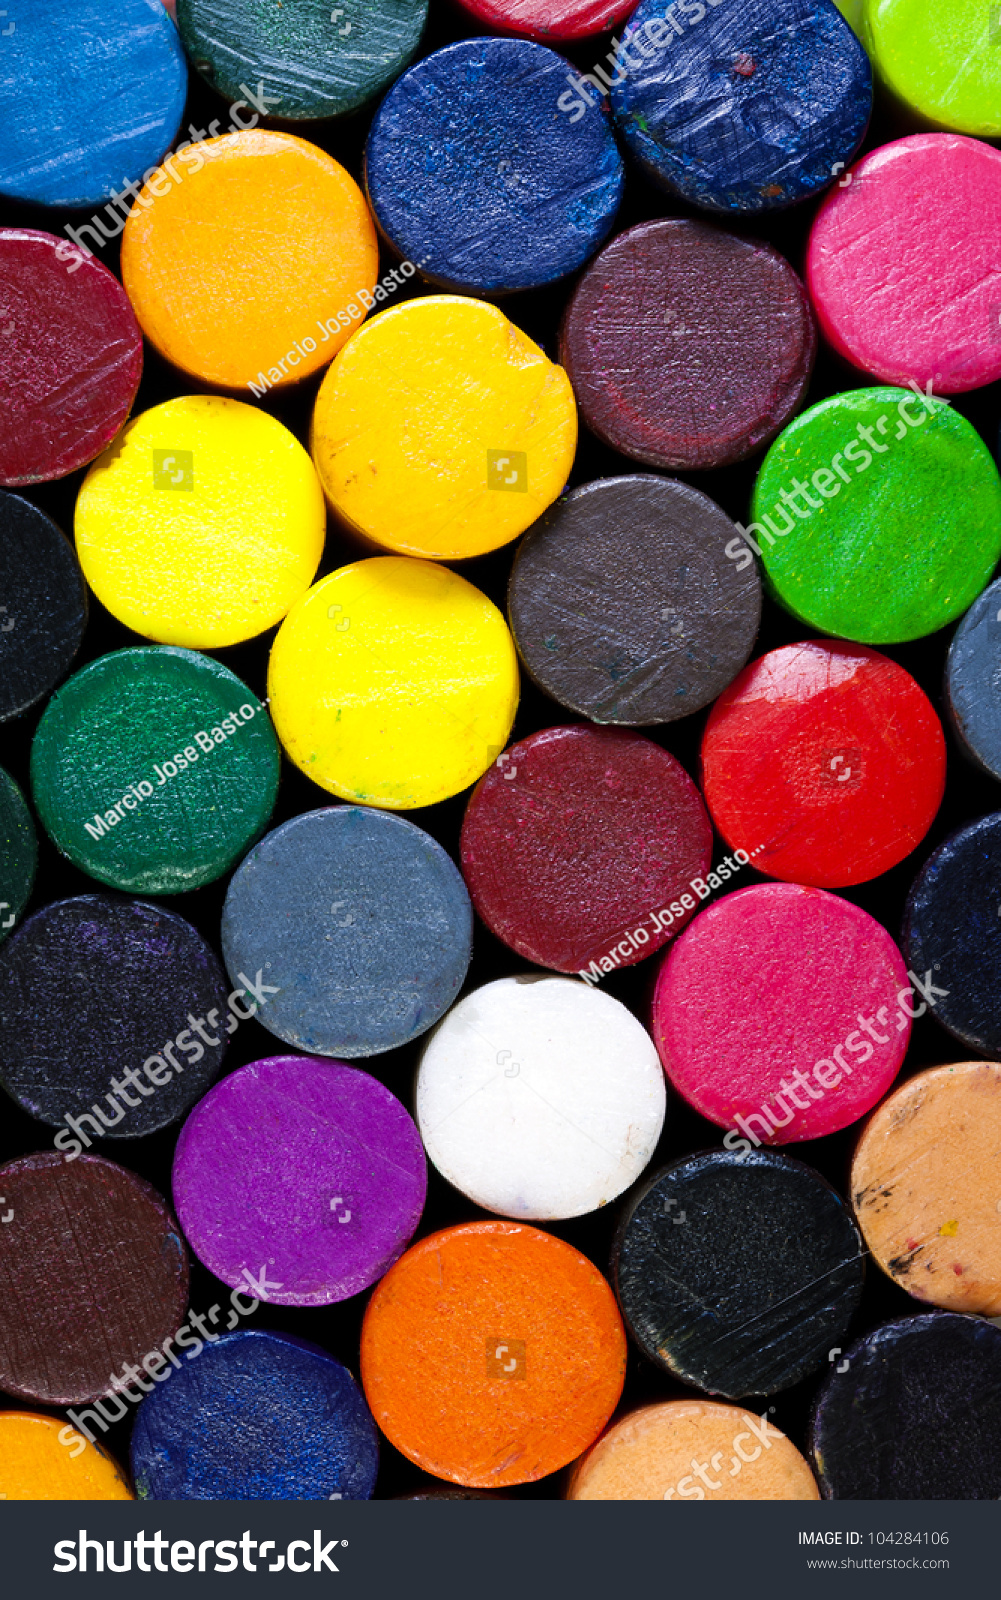 Colorful pattern of a pile of crayons. #104284106